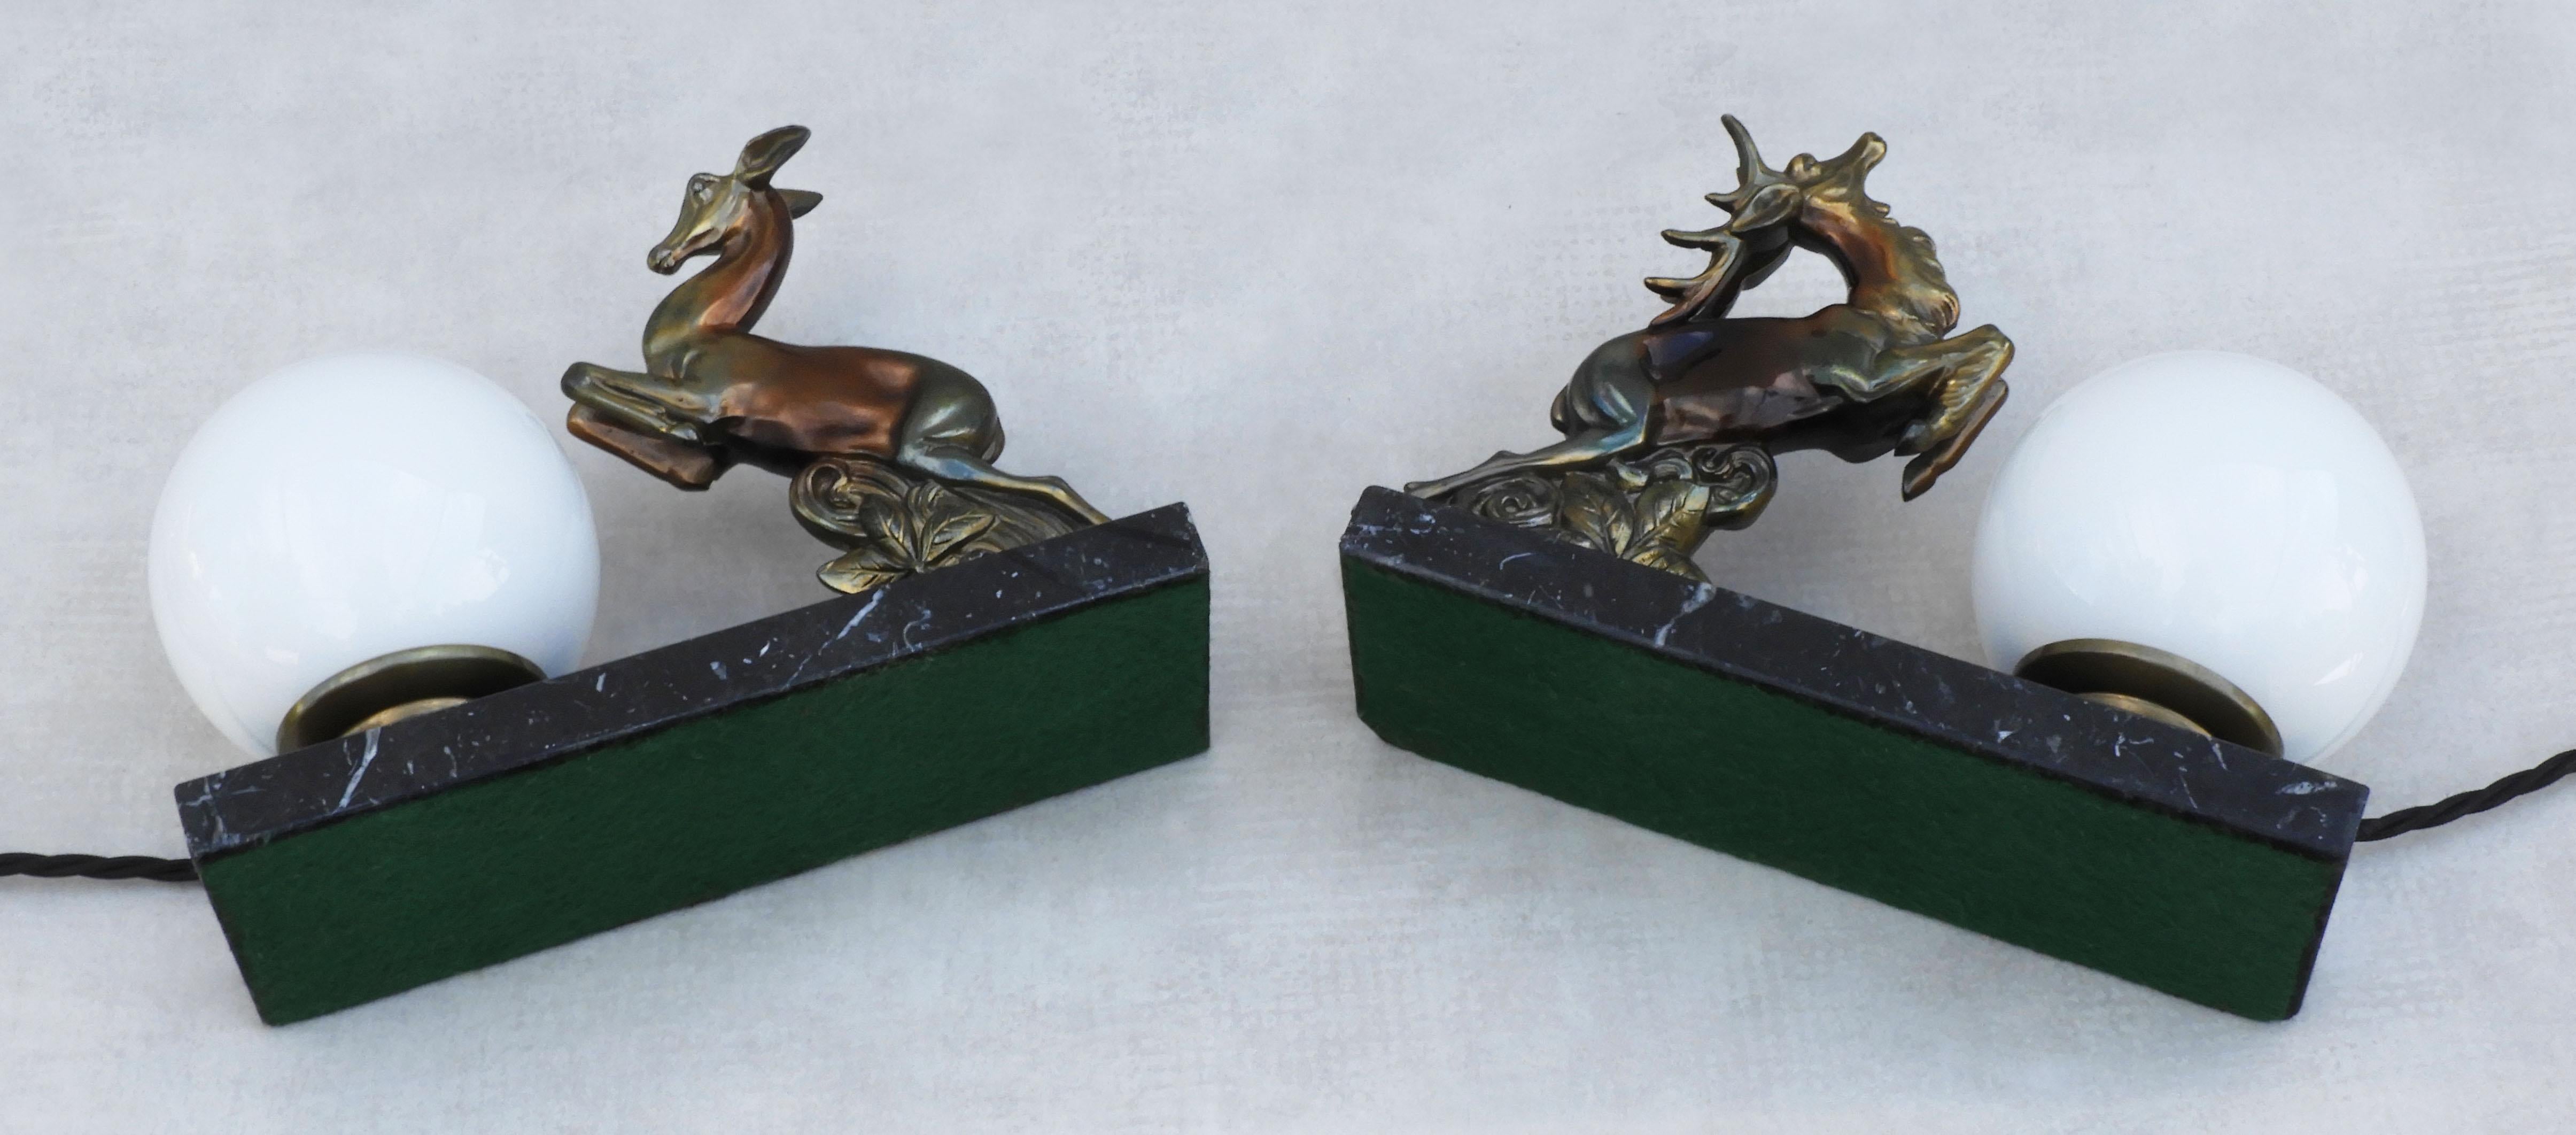 Pair of French Art Deco Deer Table Lamps or Night Light Sculptures C1930 For Sale 8